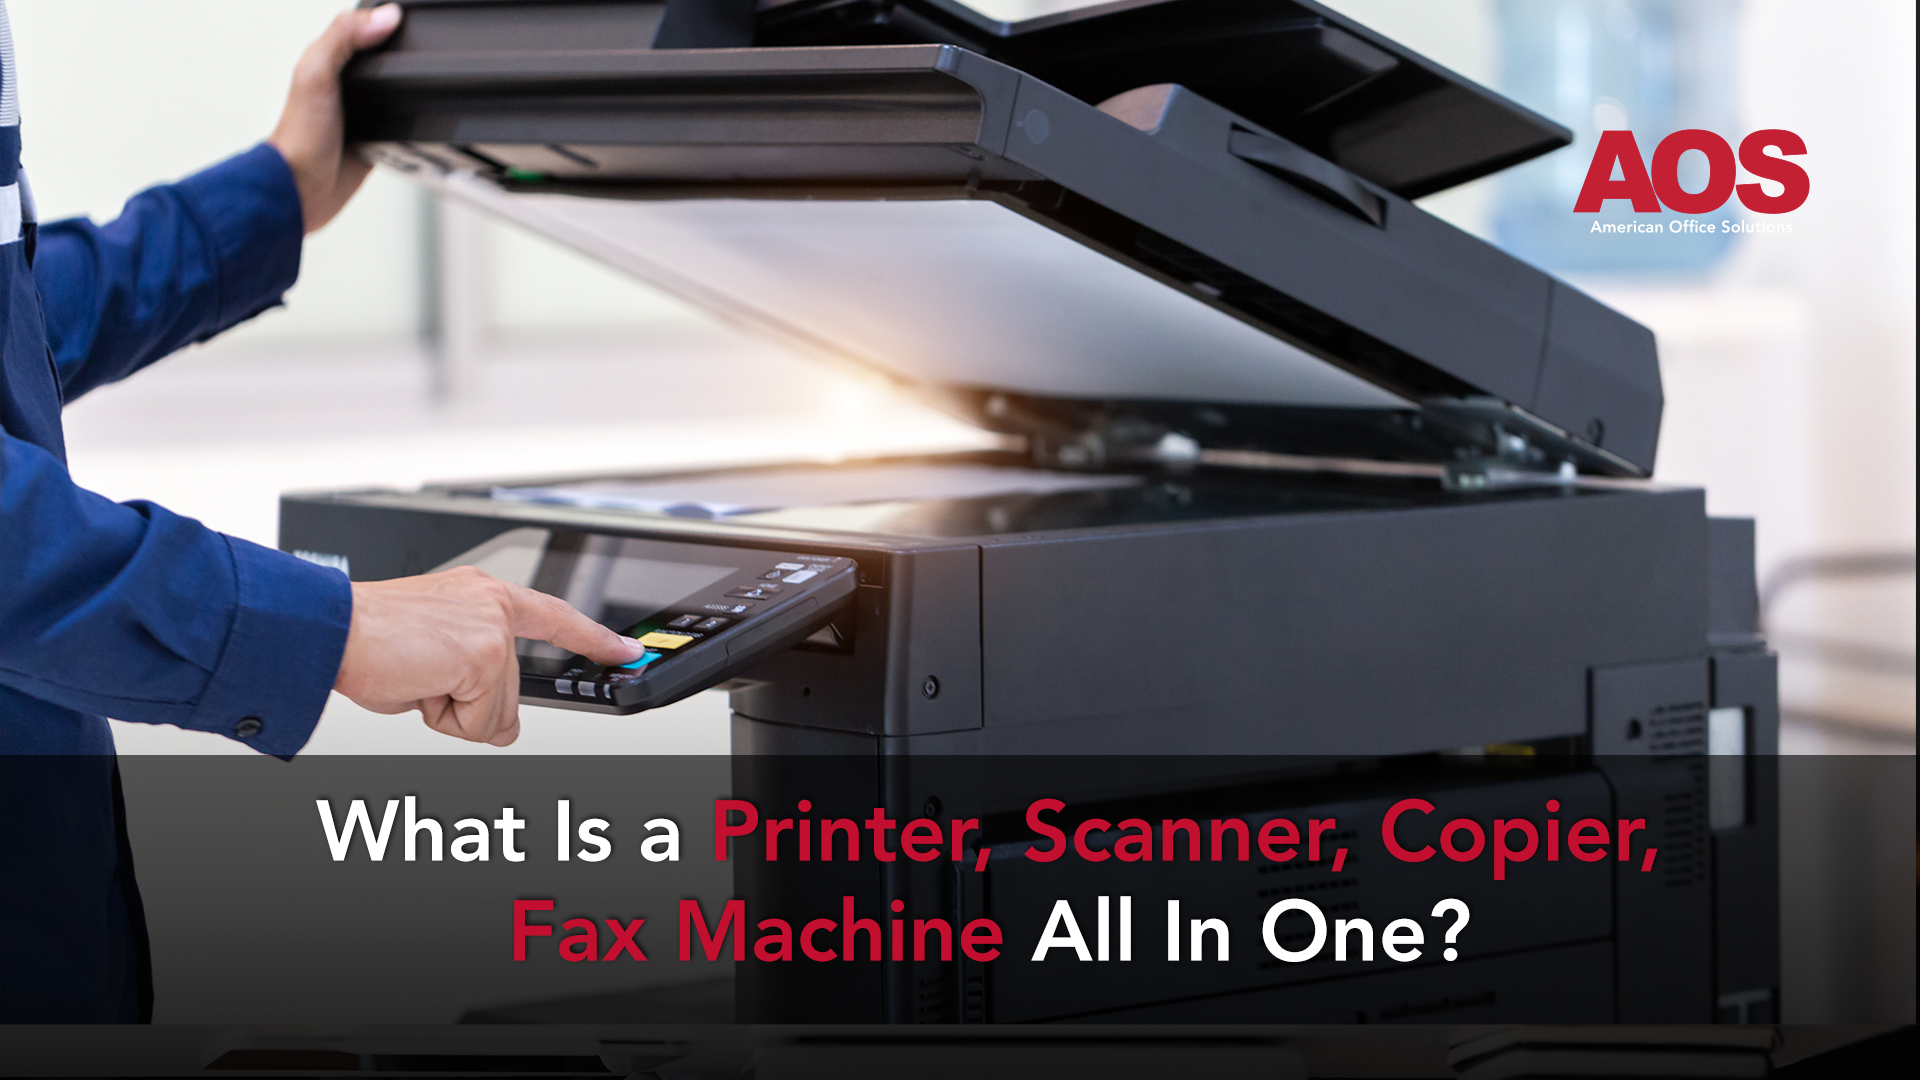 What Is A Printer, Scanner, Copier, Fax Machine All In One